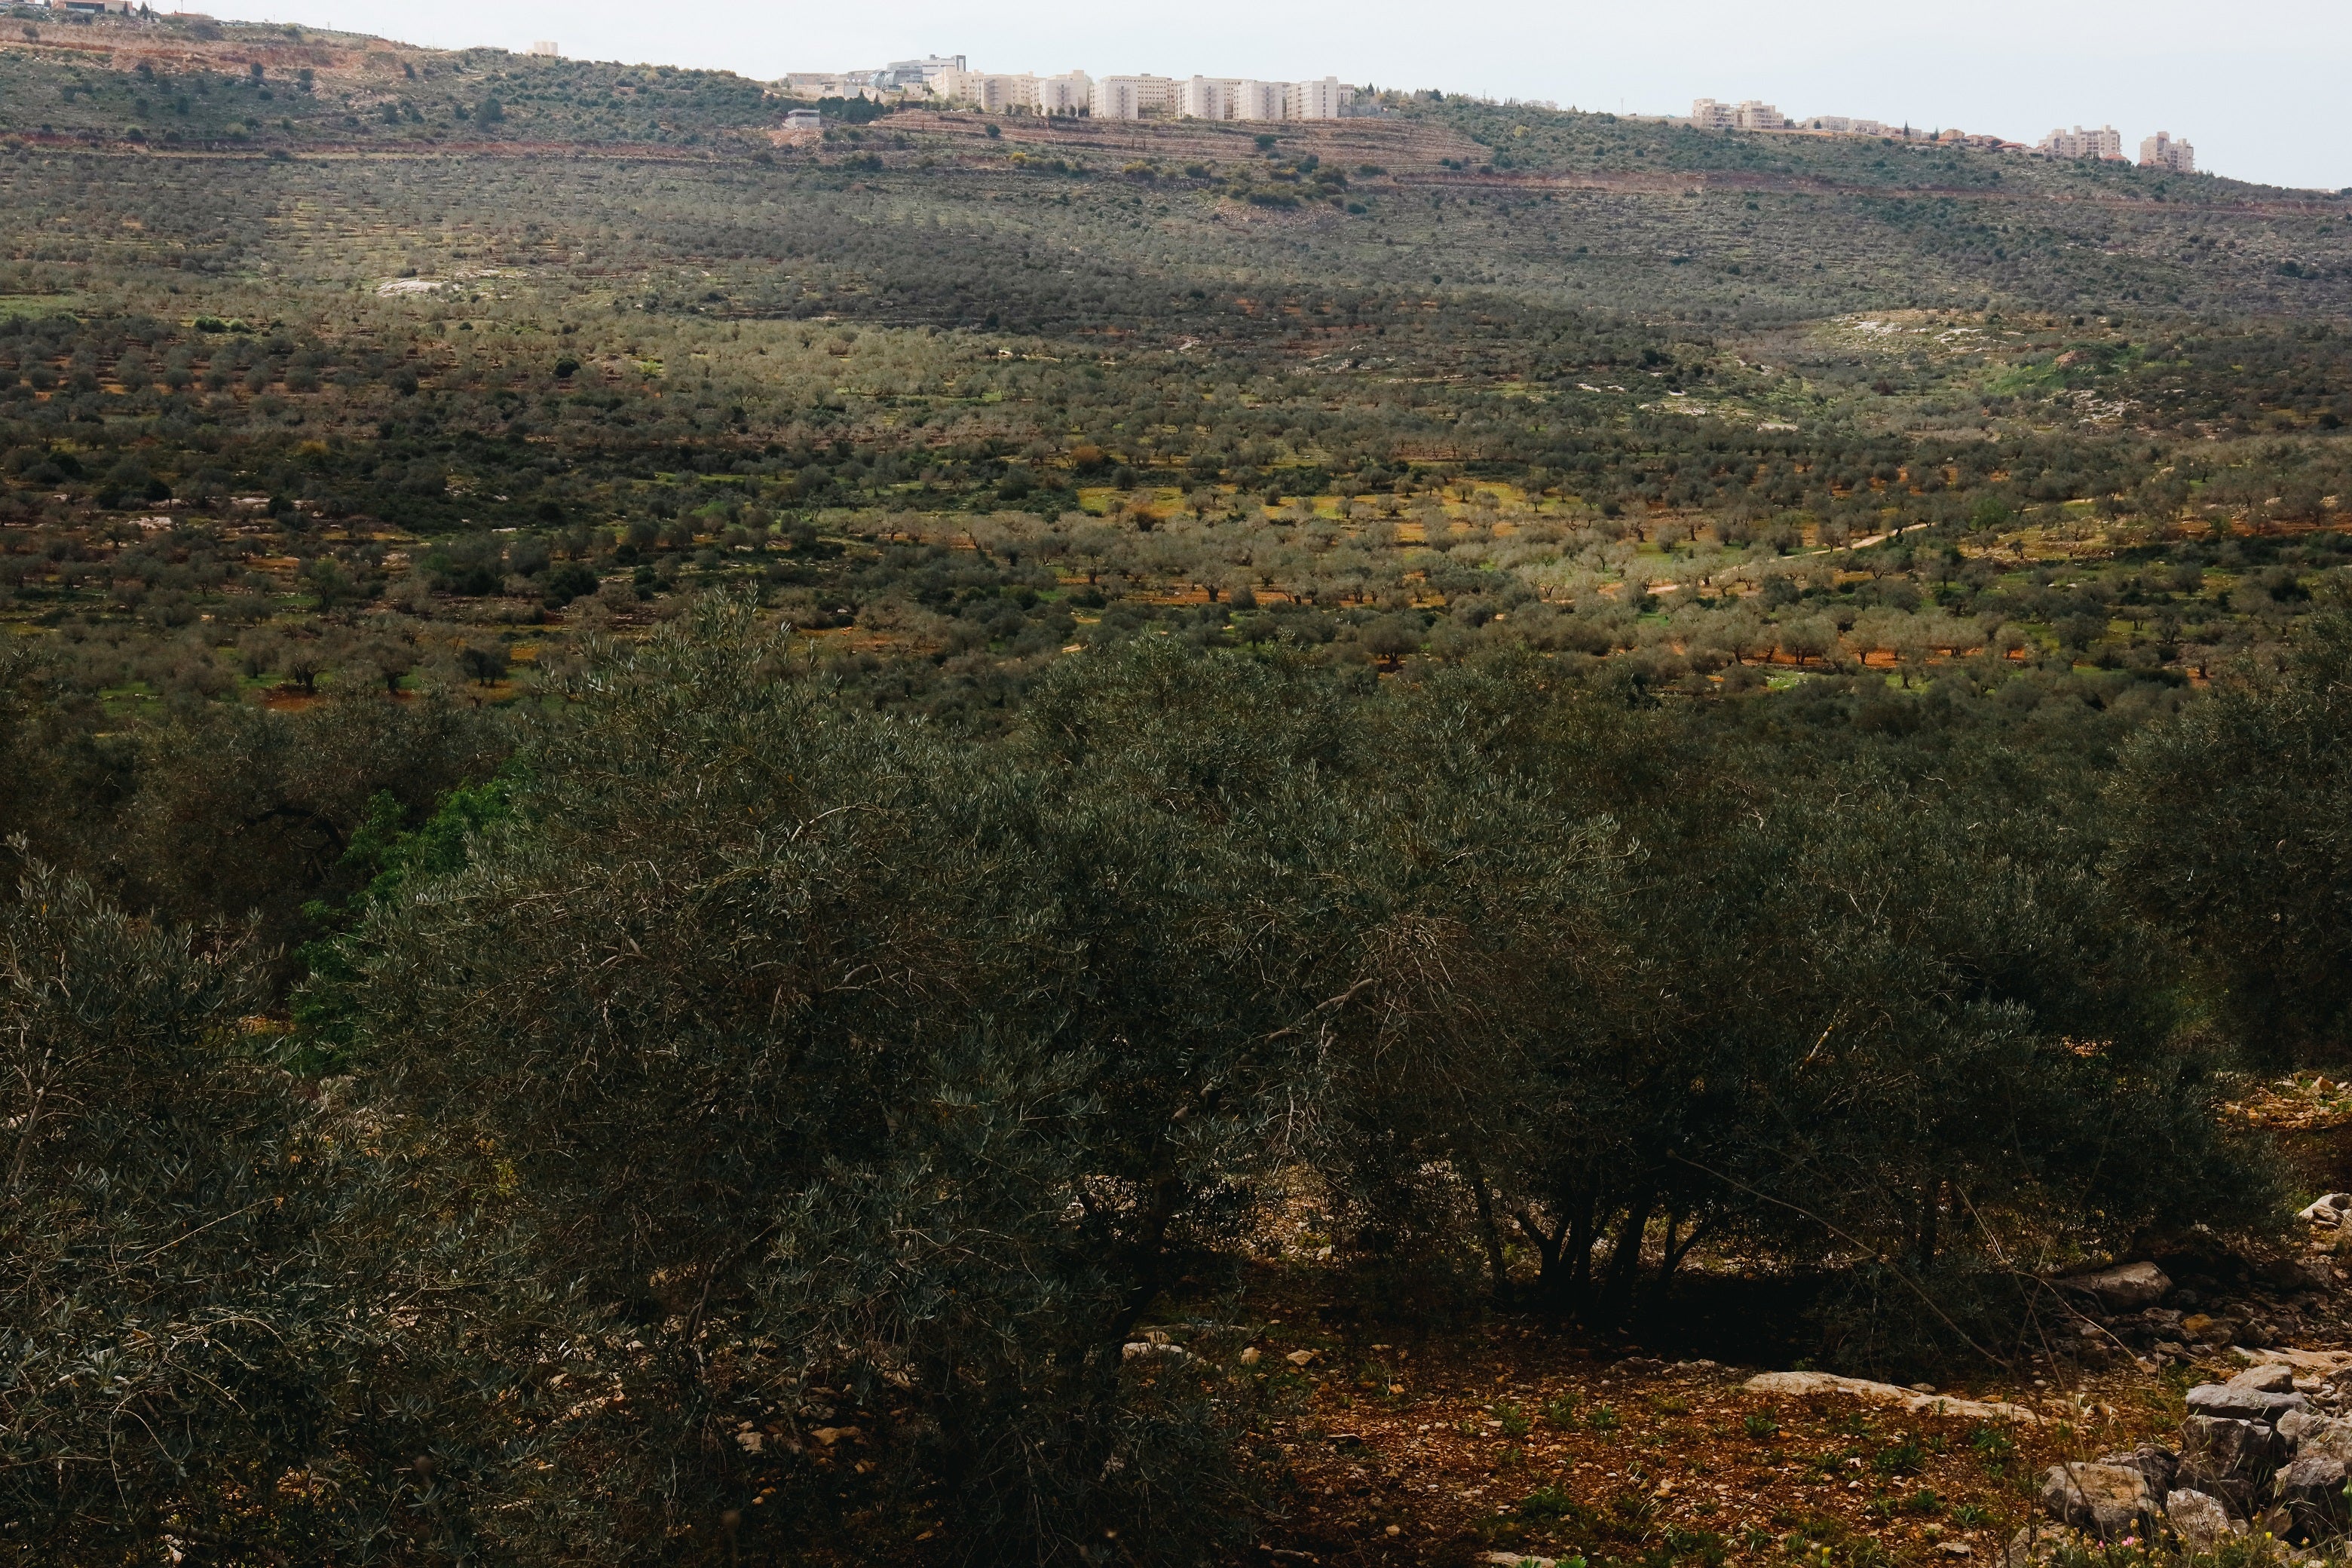 Hills and hills of Palestinian Olive Trees